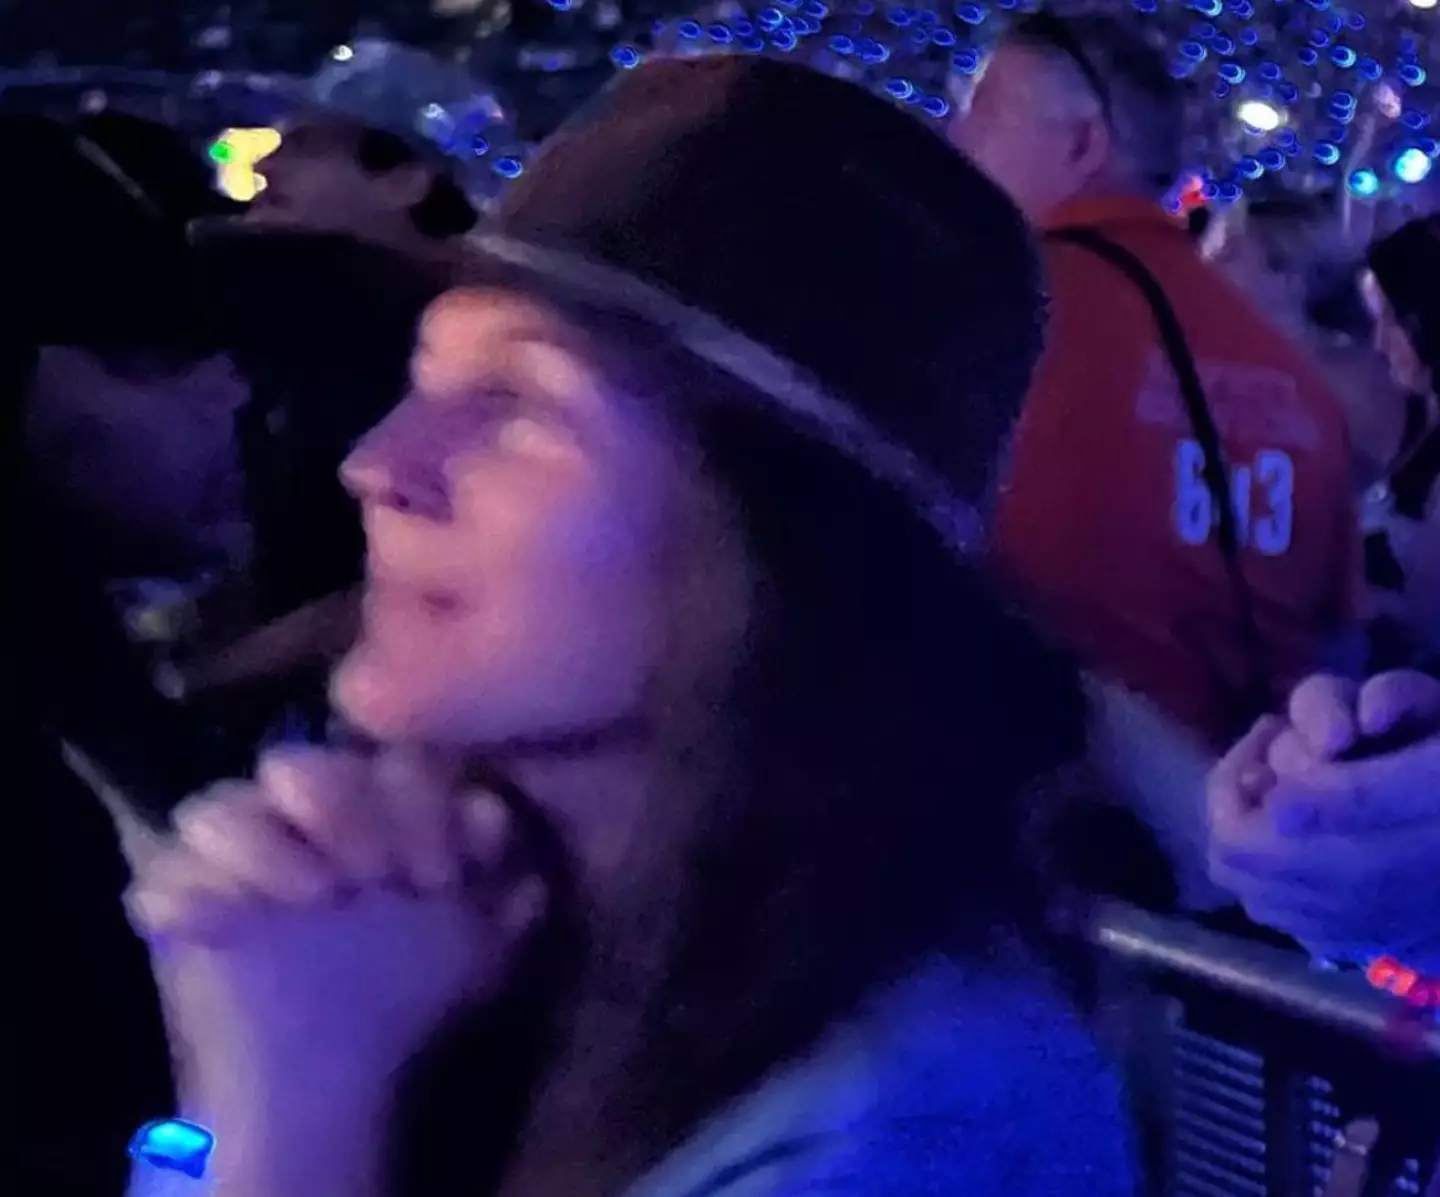 Drew Barrymore attended one of Swift's concerts.